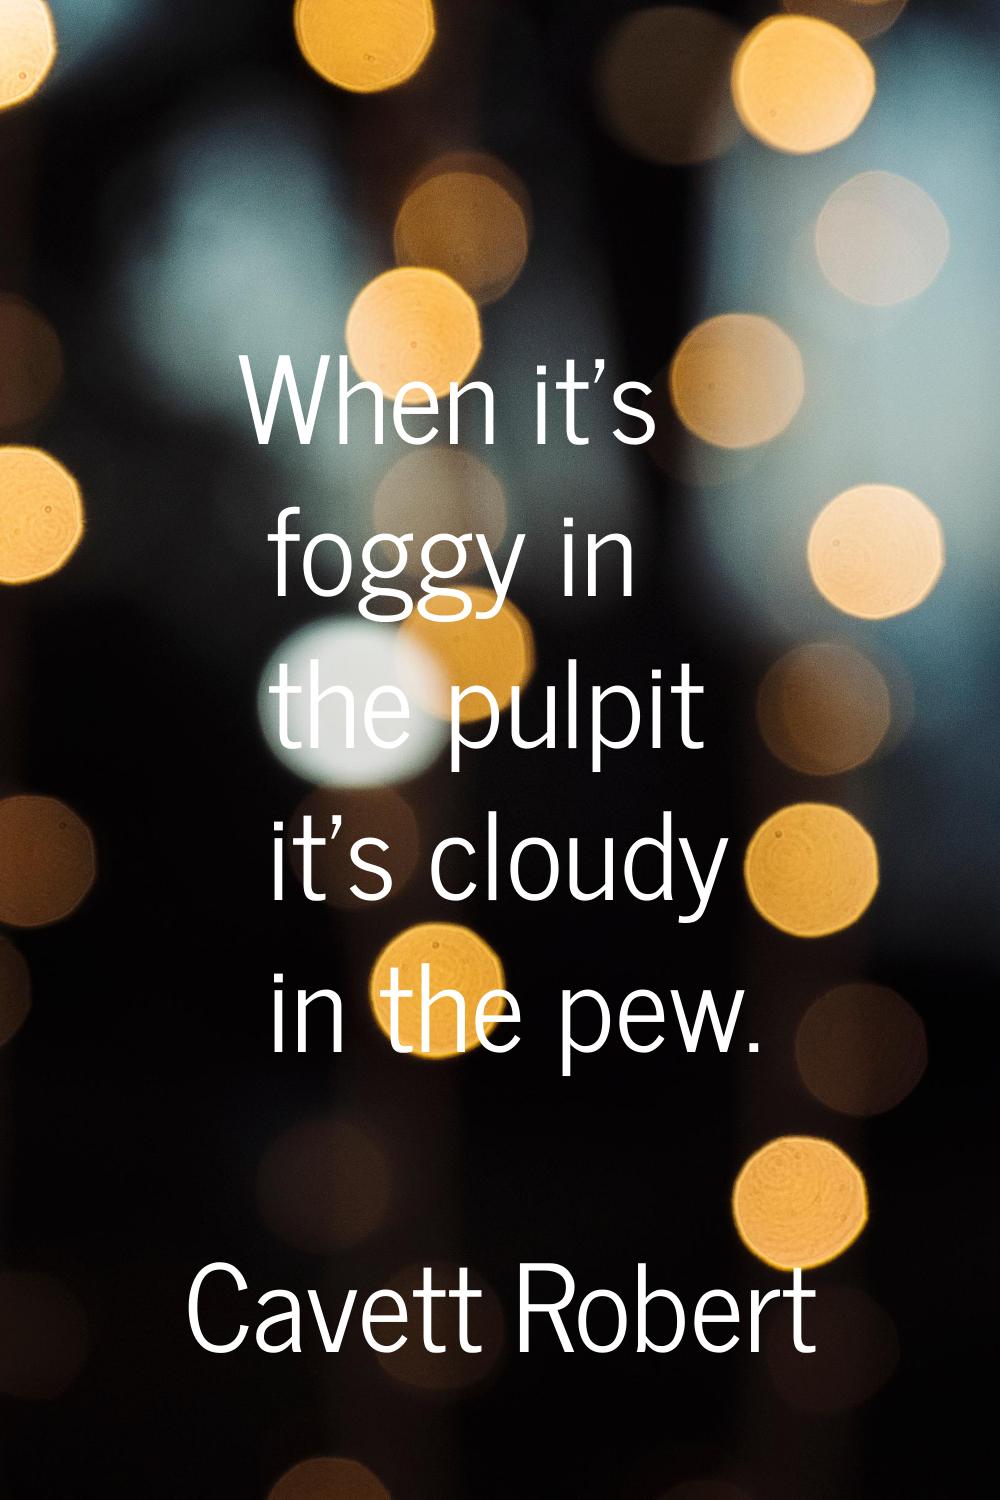 When it's foggy in the pulpit it's cloudy in the pew.